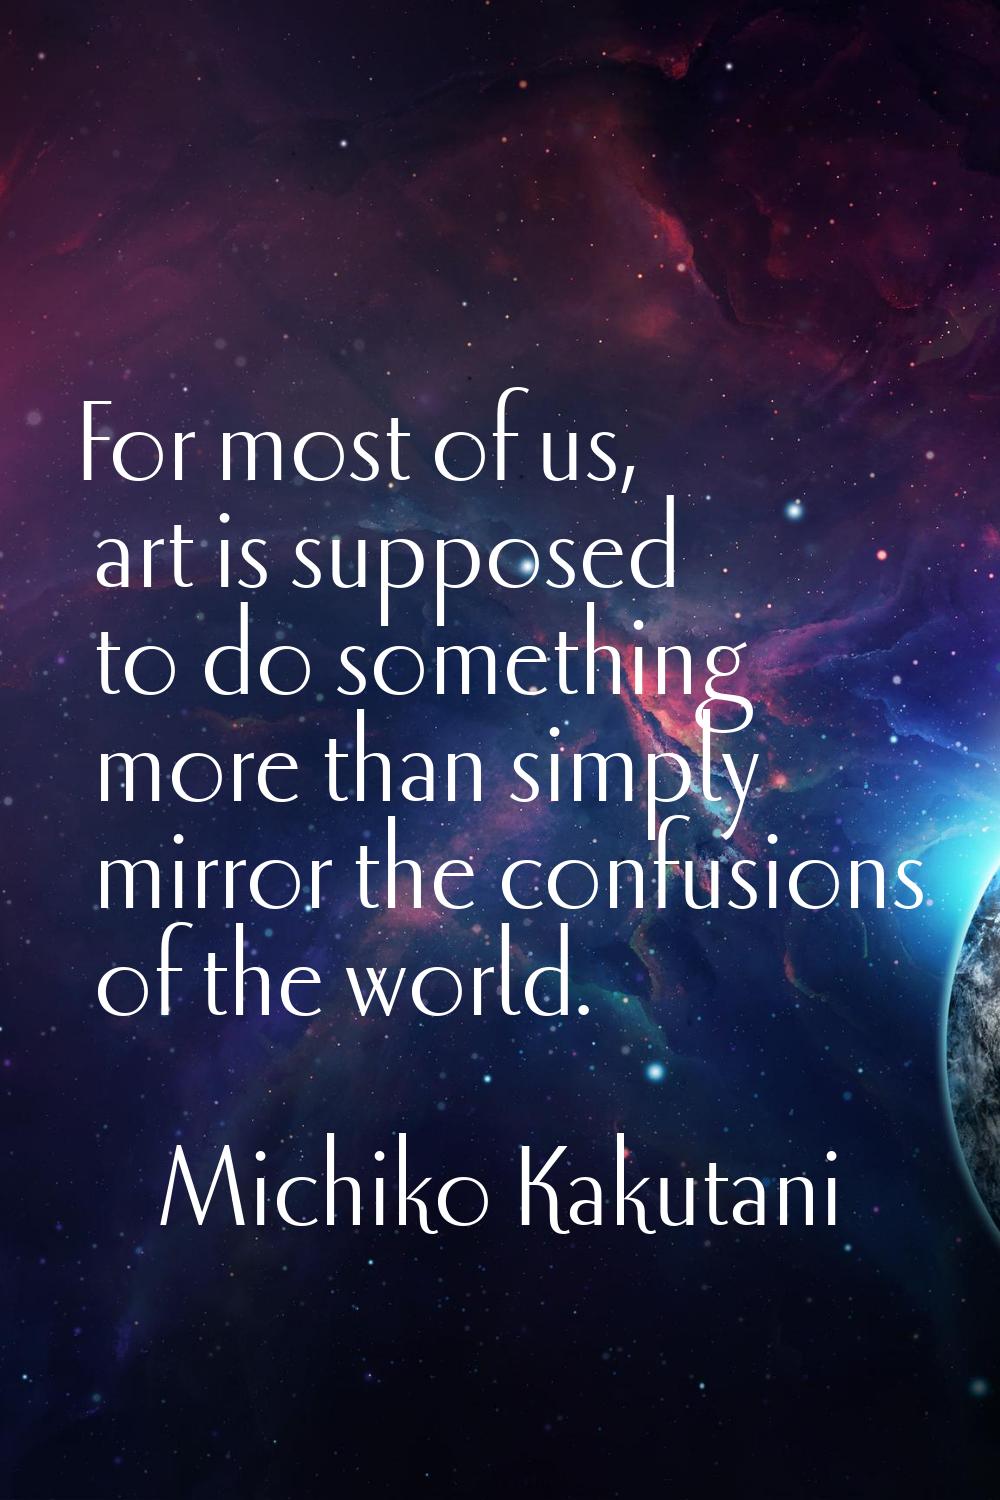 For most of us, art is supposed to do something more than simply mirror the confusions of the world